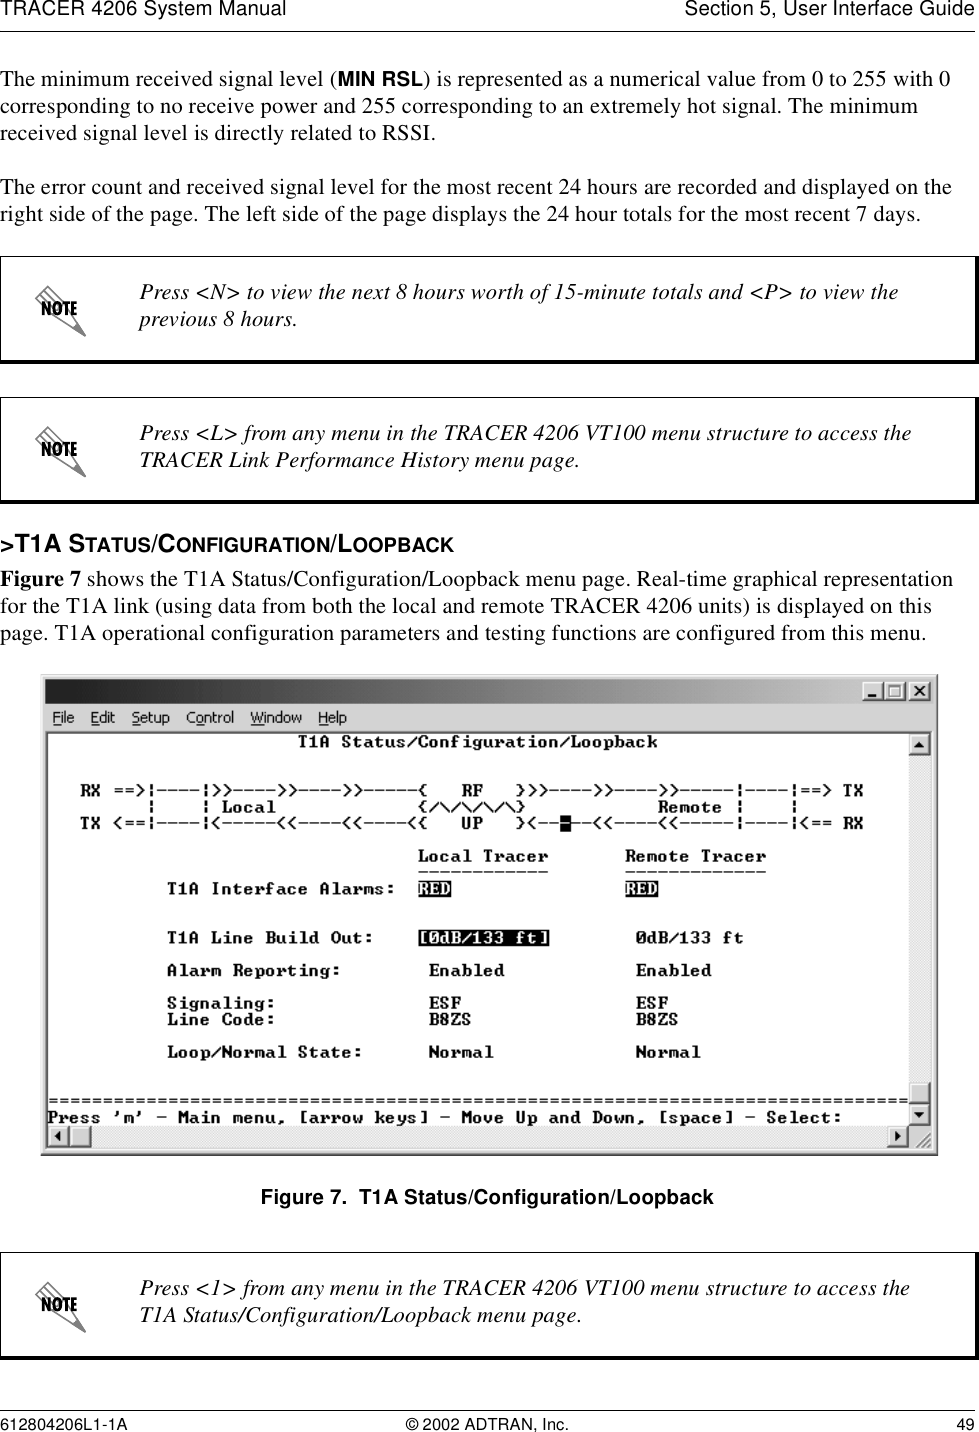 TRACER 4206 System Manual Section 5, User Interface Guide612804206L1-1A © 2002 ADTRAN, Inc. 49The minimum received signal level (MIN RSL) is represented as a numerical value from 0 to 255 with 0 corresponding to no receive power and 255 corresponding to an extremely hot signal. The minimum received signal level is directly related to RSSI.The error count and received signal level for the most recent 24 hours are recorded and displayed on the right side of the page. The left side of the page displays the 24 hour totals for the most recent 7 days. &gt;T1A STATUS/CONFIGURATION/LOOPBACKFigure 7 shows the T1A Status/Configuration/Loopback menu page. Real-time graphical representation for the T1A link (using data from both the local and remote TRACER 4206 units) is displayed on this page. T1A operational configuration parameters and testing functions are configured from this menu.Figure 7.  T1A Status/Configuration/LoopbackPress &lt;N&gt; to view the next 8 hours worth of 15-minute totals and &lt;P&gt; to view the previous 8 hours.Press &lt;L&gt; from any menu in the TRACER 4206 VT100 menu structure to access the TRACER Link Performance History menu page.Press &lt;1&gt; from any menu in the TRACER 4206 VT100 menu structure to access the T1A Status/Configuration/Loopback menu page.